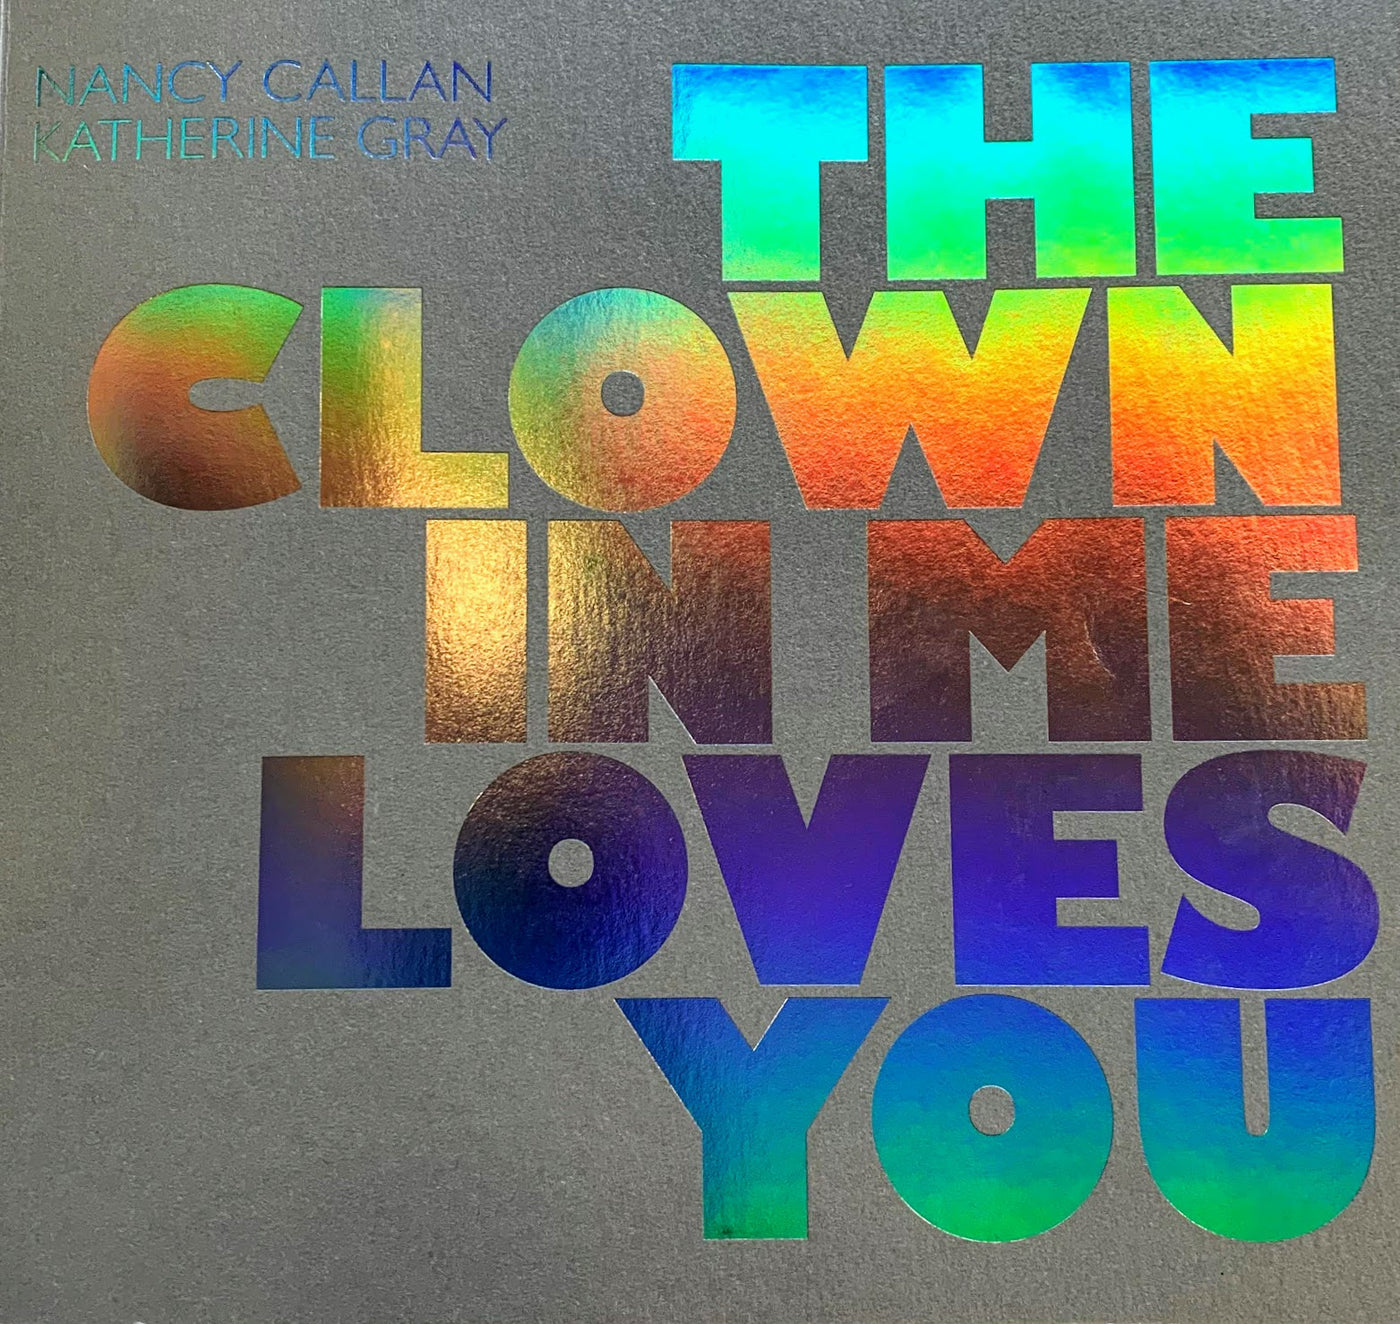 Nancy Callan and Katherine Gray: The Clown in Me Loves You